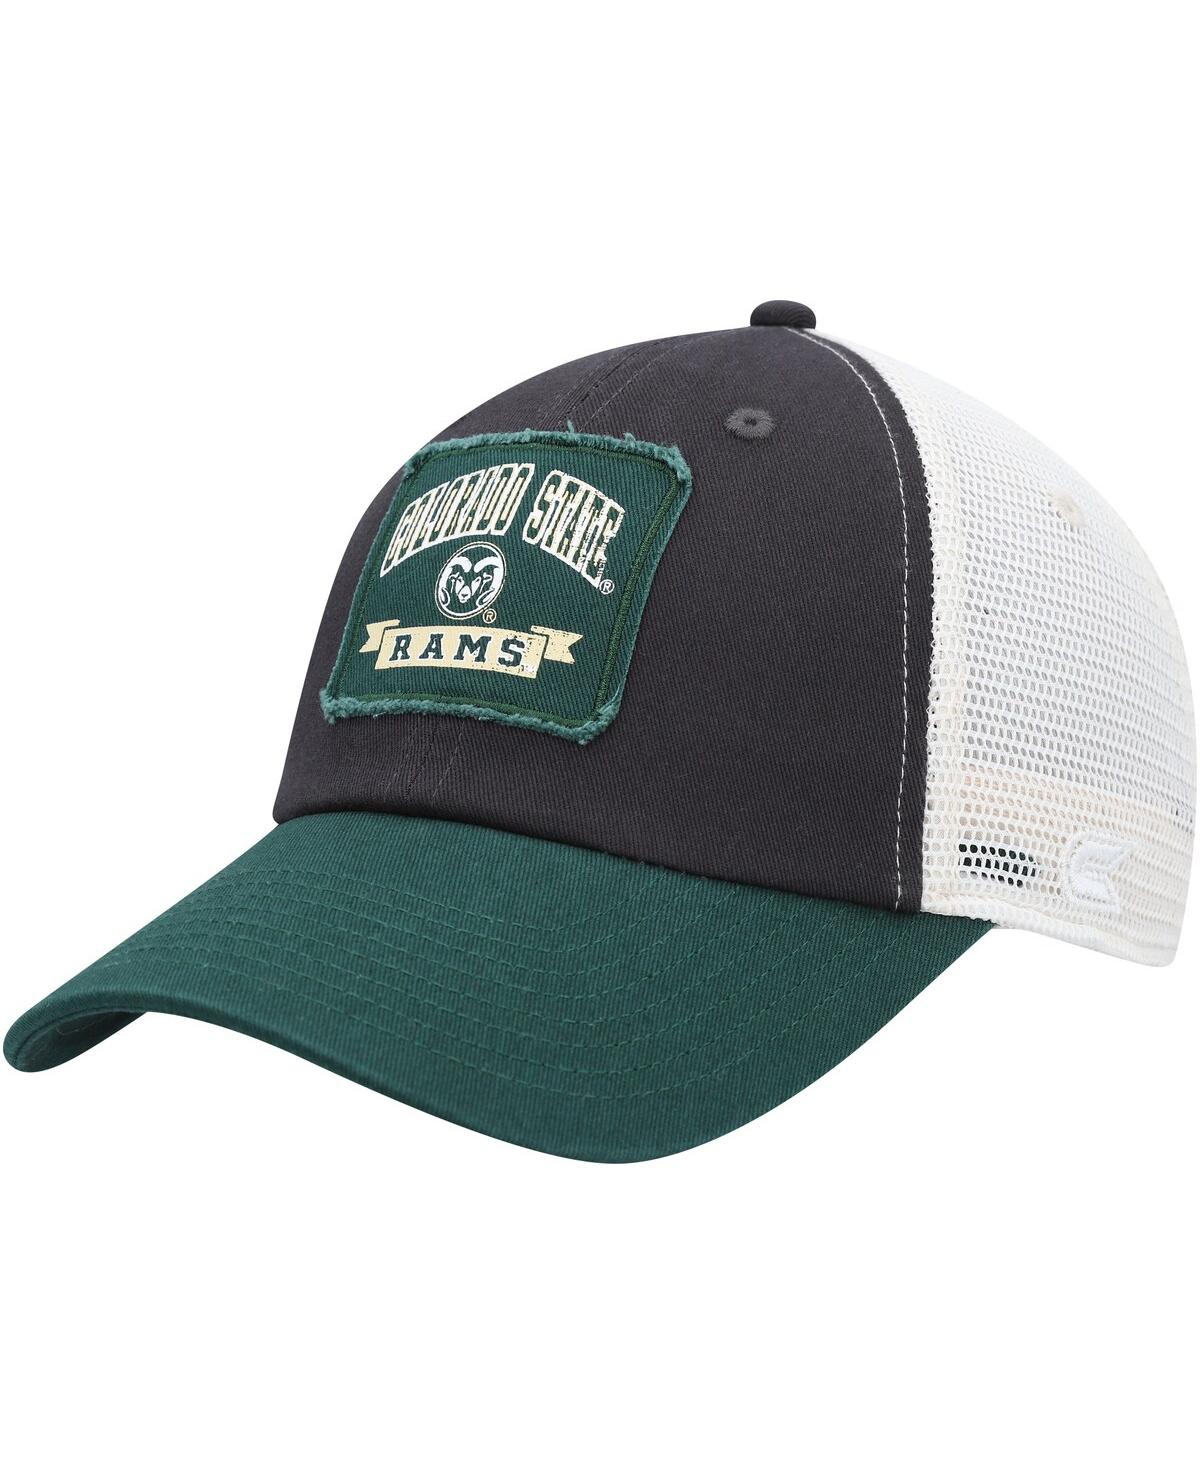 Men's Colosseum Charcoal Colorado State Rams Objection Snapback Hat - Charcoal